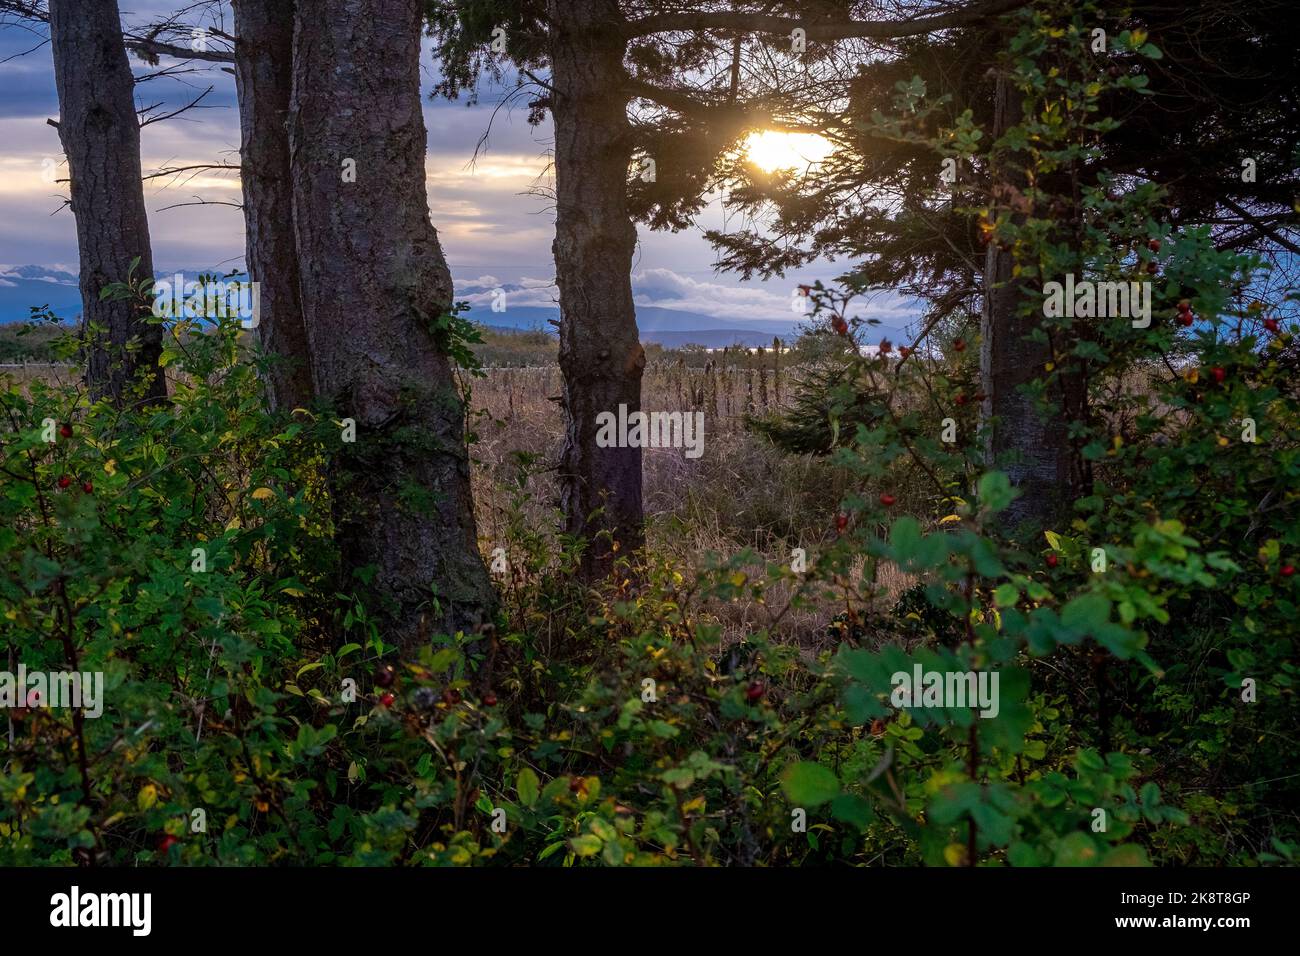 Paesaggio lungo Ebey's Trail, Admiralty Inlet Preserve, Whidbey Island, Washington Foto Stock